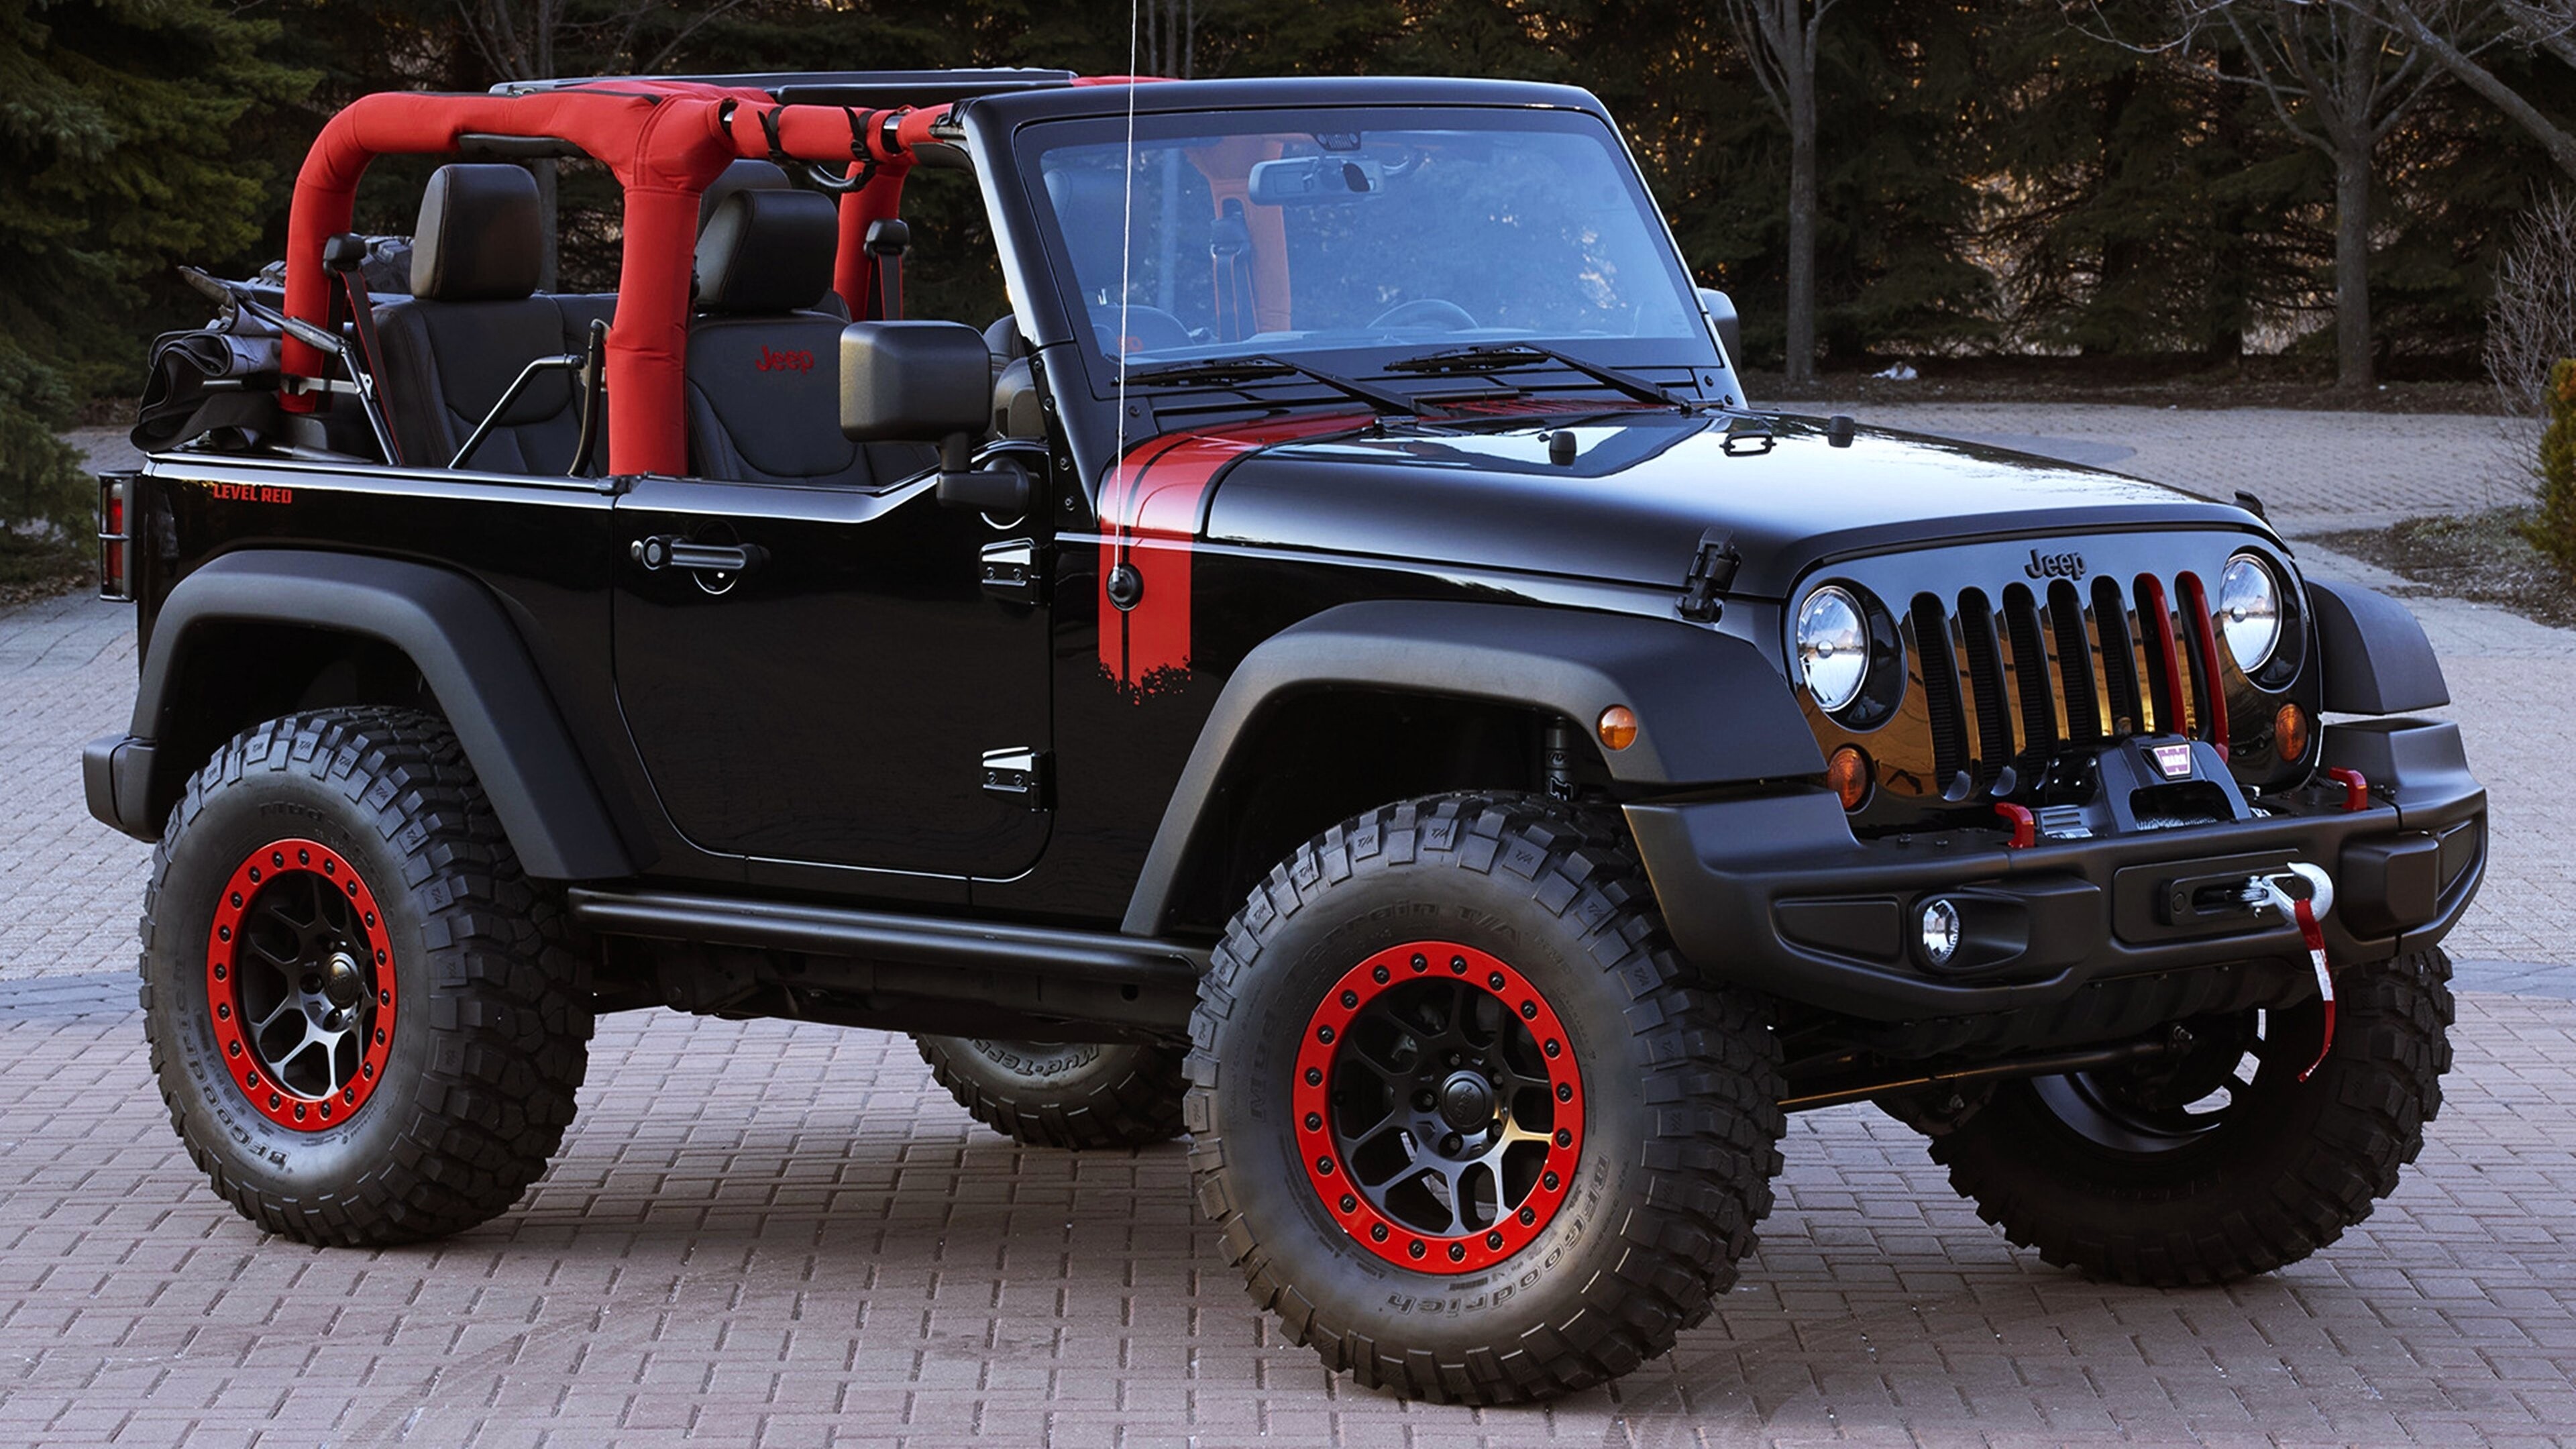 Jeep: Chrysler releases a limited special edition of the Wrangler every year, which differs from the main models in terms of exterior, interior or additional options. 3840x2160 4K Wallpaper.